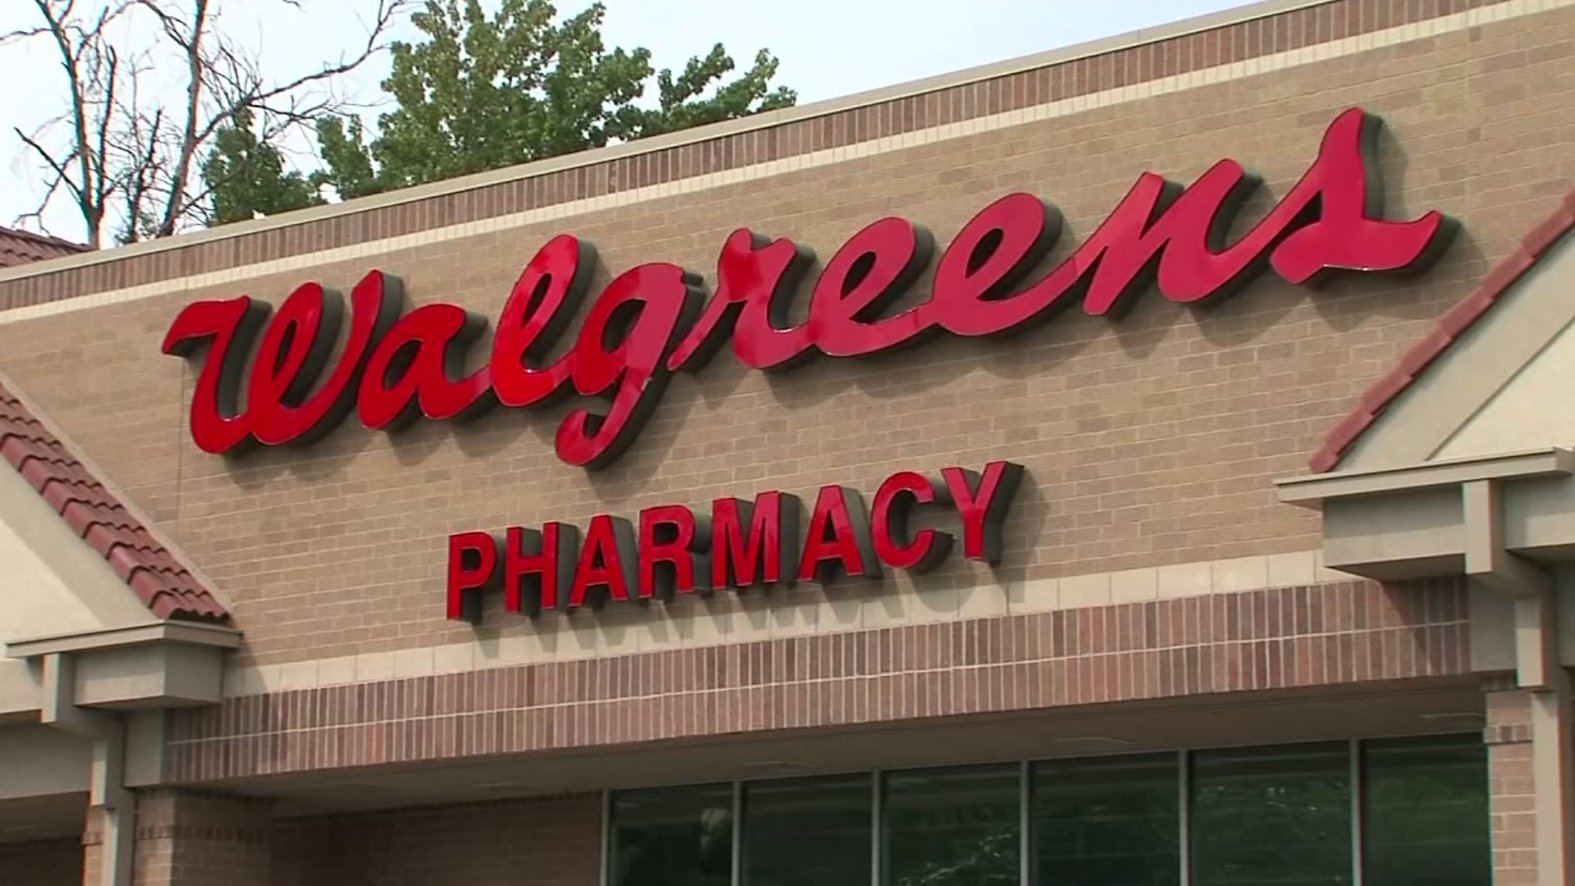 Suspect in Viral Walgreens Video Facing 15 Charges Linked to 8 Separate